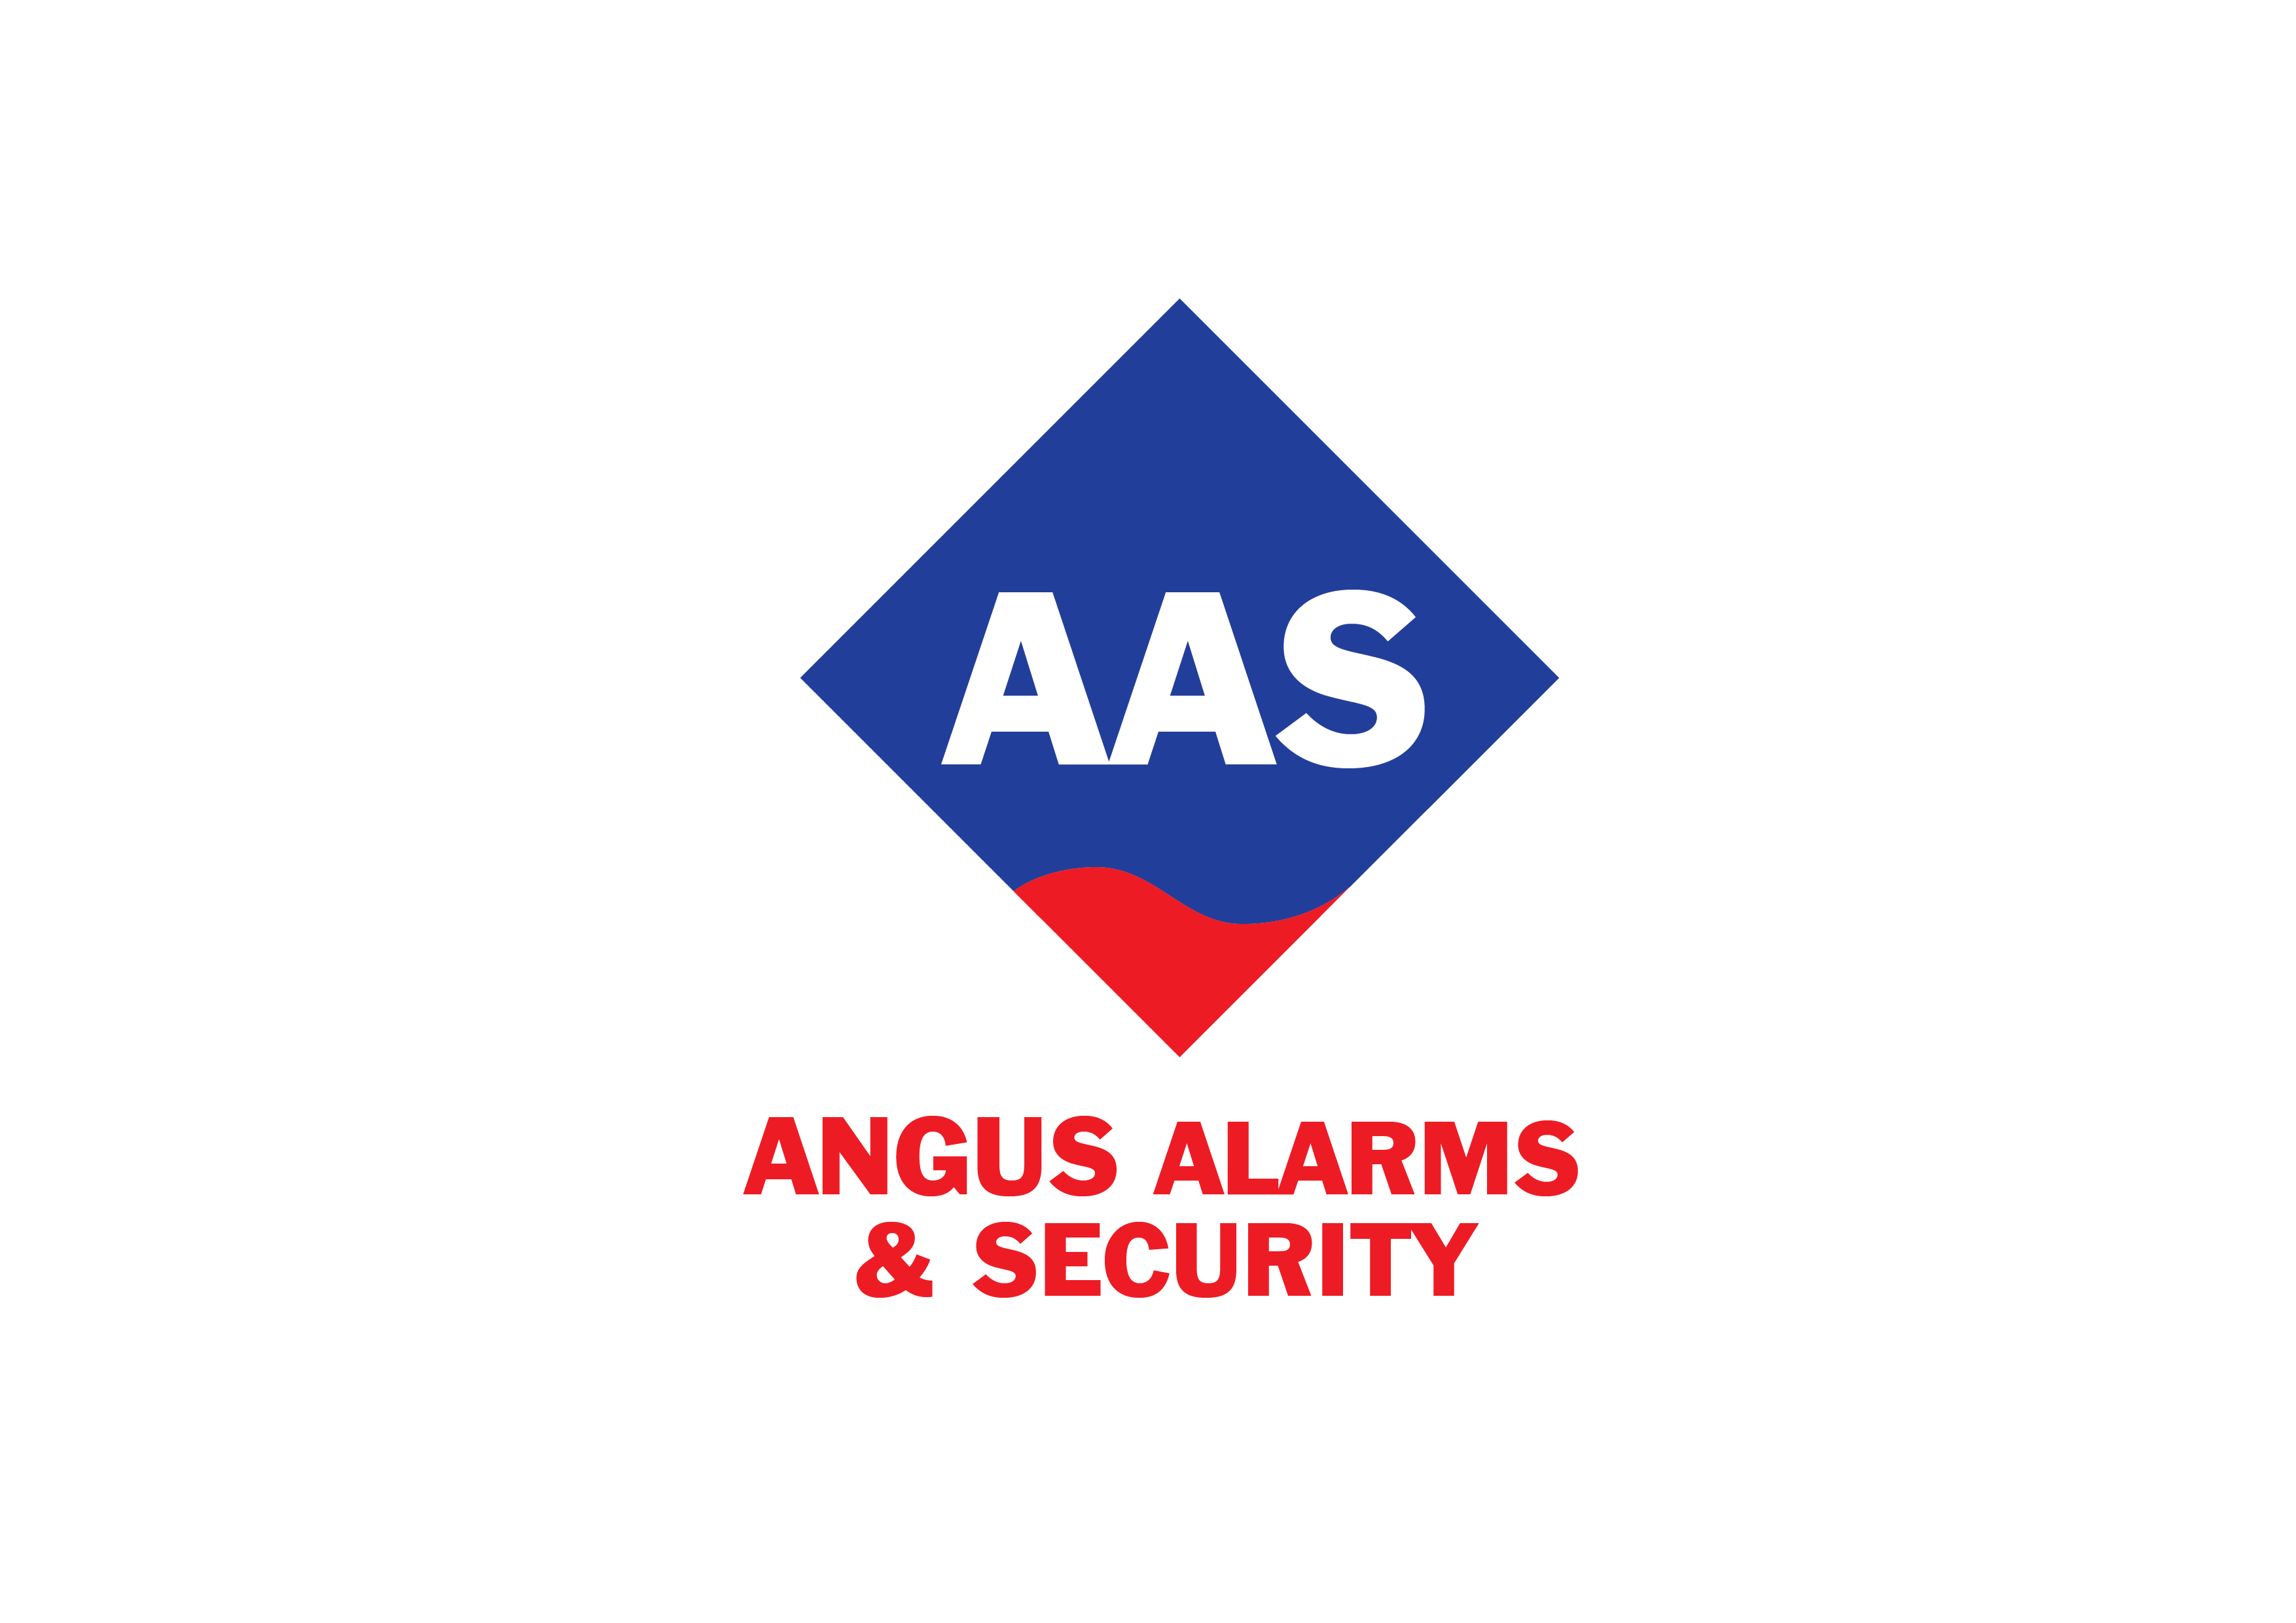 Angus Alarms & Security